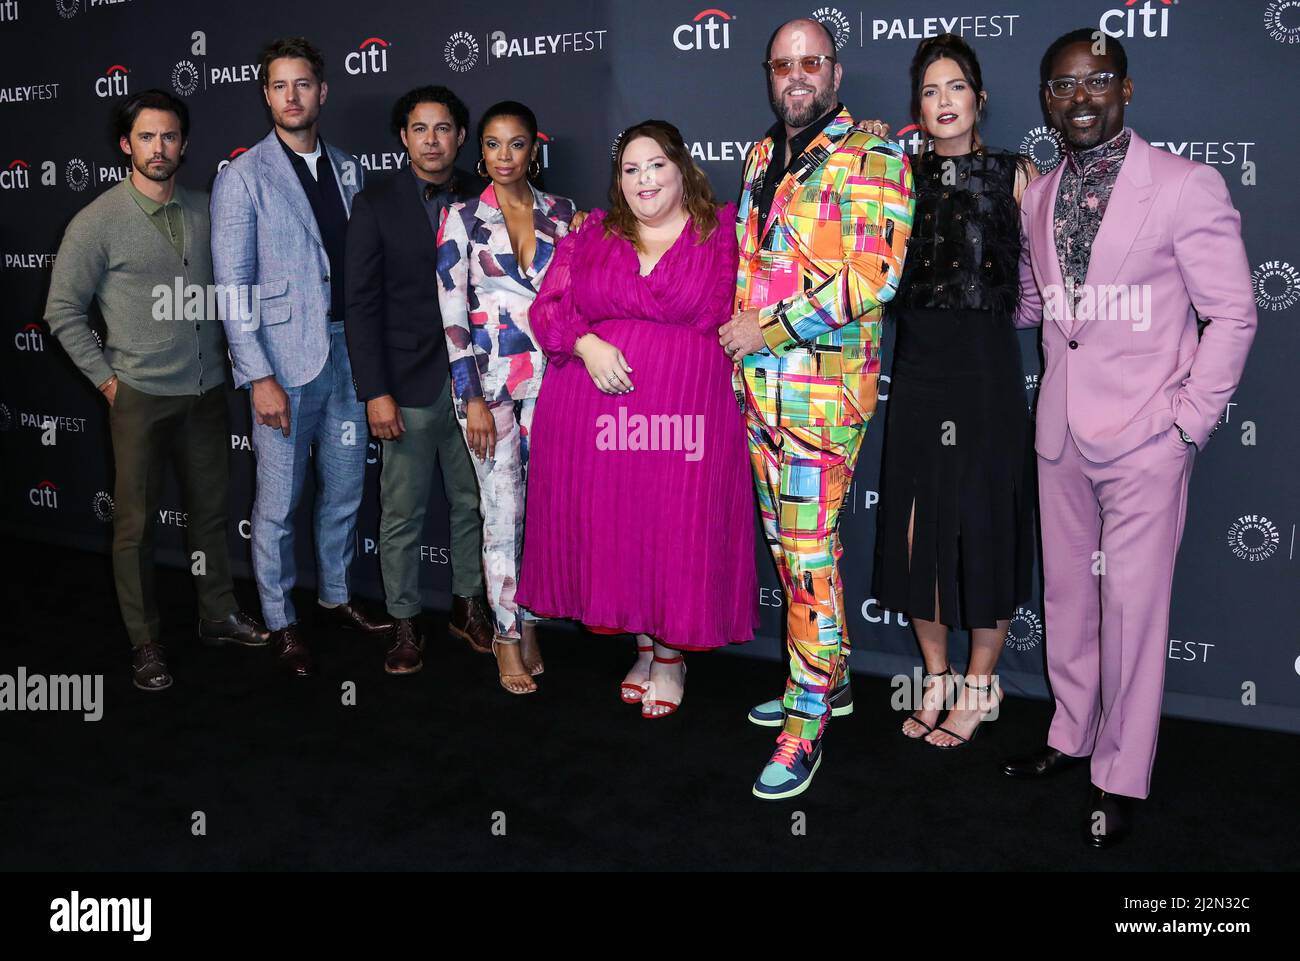 HOLLYWOOD, LOS ANGELES, CALIFORNIA, USA - APRIL 02: Milo Ventimiglia, Justin Hartley, Jon Huertas, Susan Kelechi Watson, Chrissy Metz, Chris Sullivan, Mandy Moore and Sterling K. Brown arrive at the 2022 PaleyFest LA - NBC's 'This Is Us' held at the Dolby Theatre on April 2, 2022 in Hollywood, Los Angeles, California, United States. (Photo by Xavier Collin/Image Press Agency/Sipa USA) Stock Photo